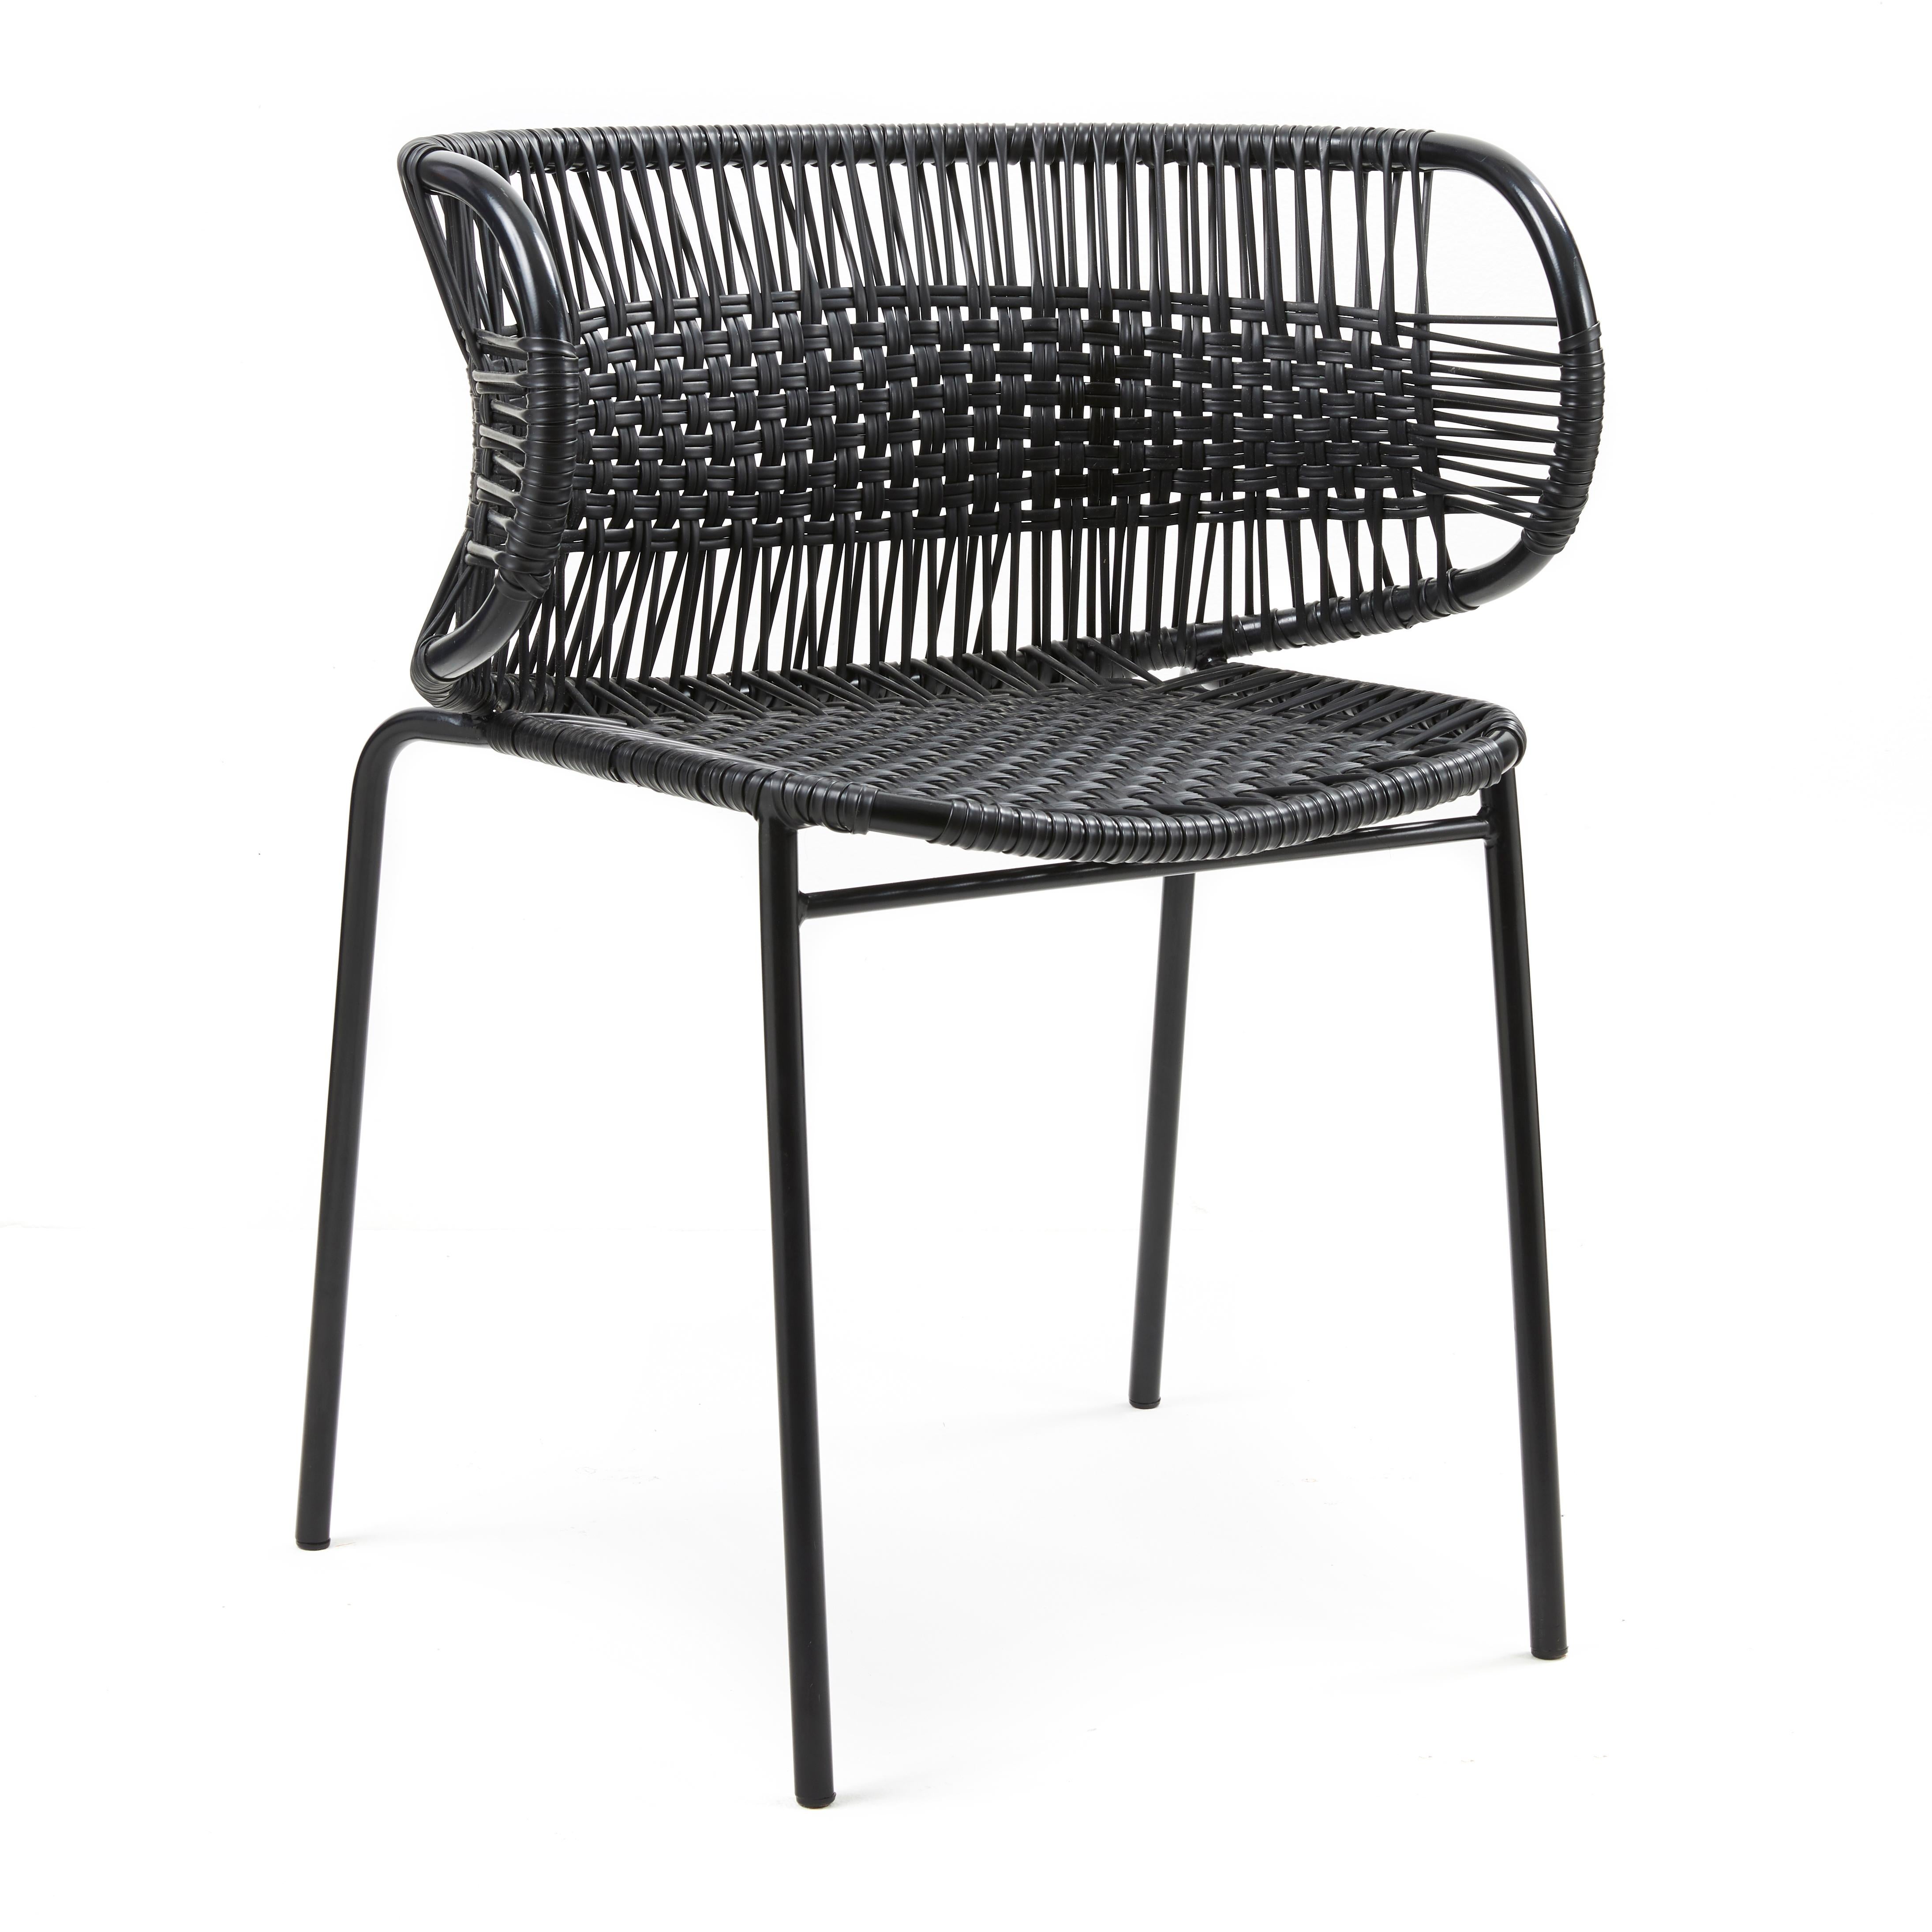 Black Cielo stacking chair with armrest by Sebastian Herkner.
Materials: Galvanized and powder-coated tubular steel. PVC strings are made from recycled plastic.
Technique: made from recycled plastic and weaved by local craftspeople in Cartagena,